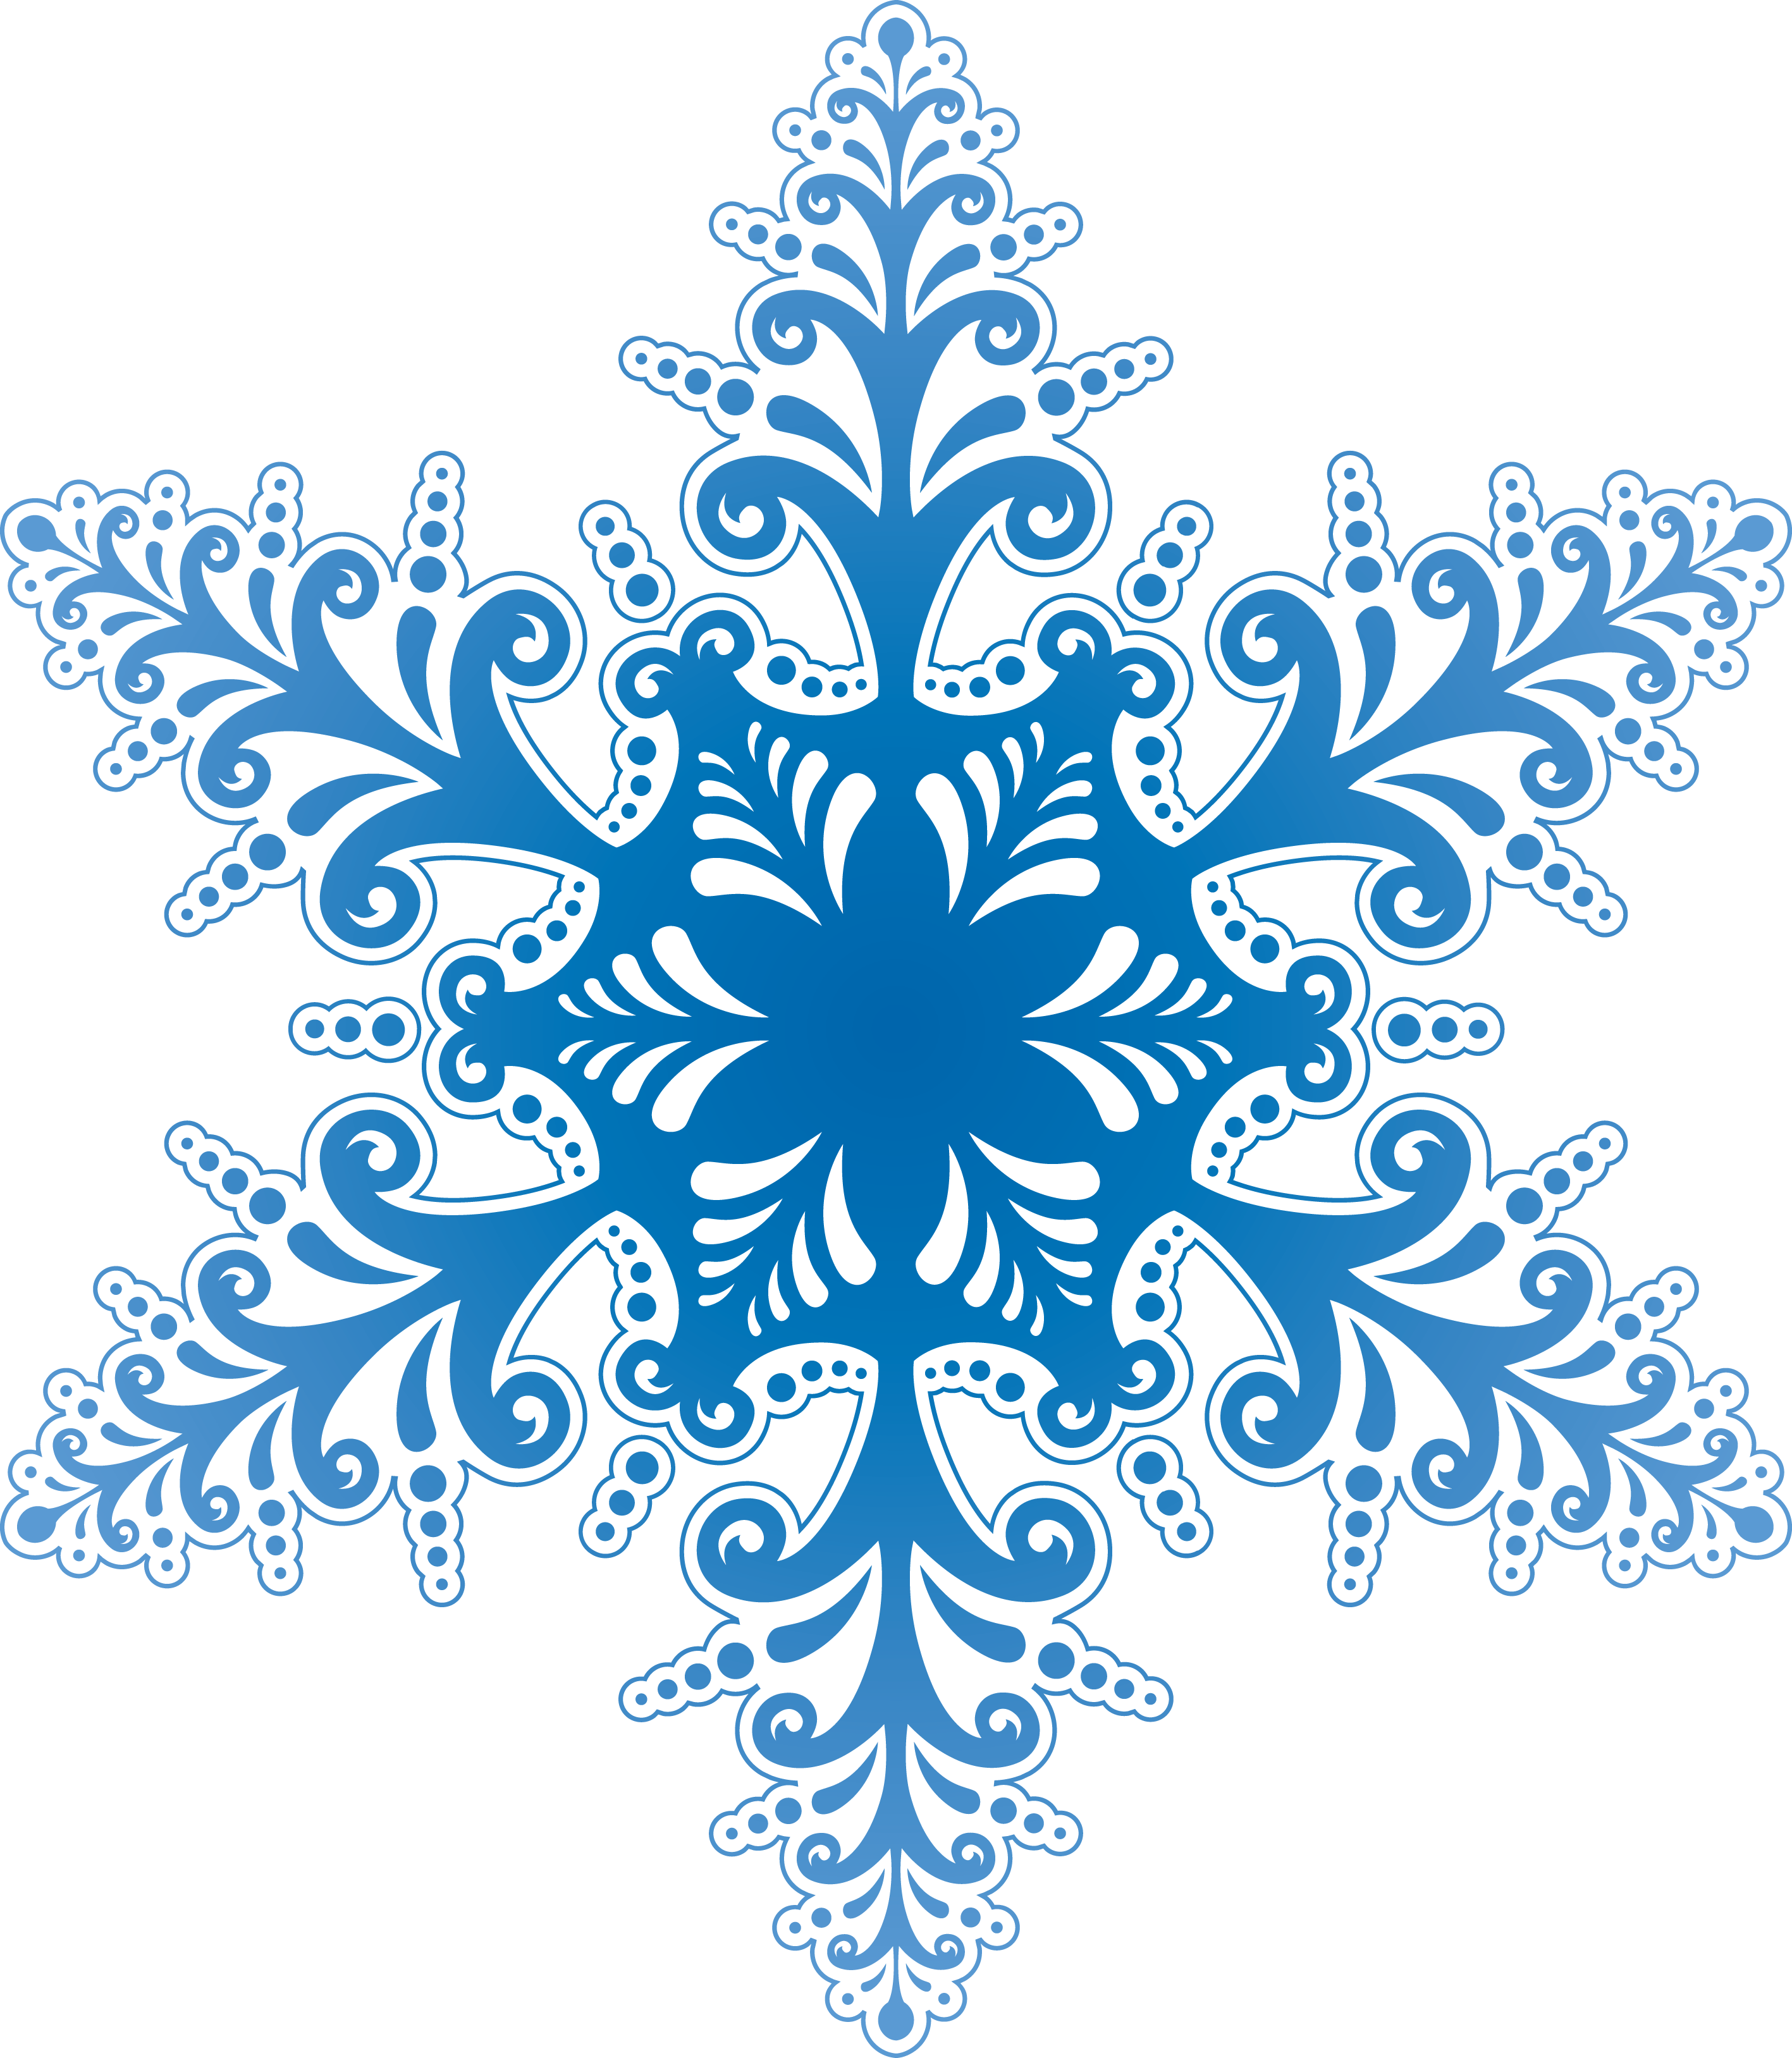 Snowflakes PNG images free download, snowflake PNG.